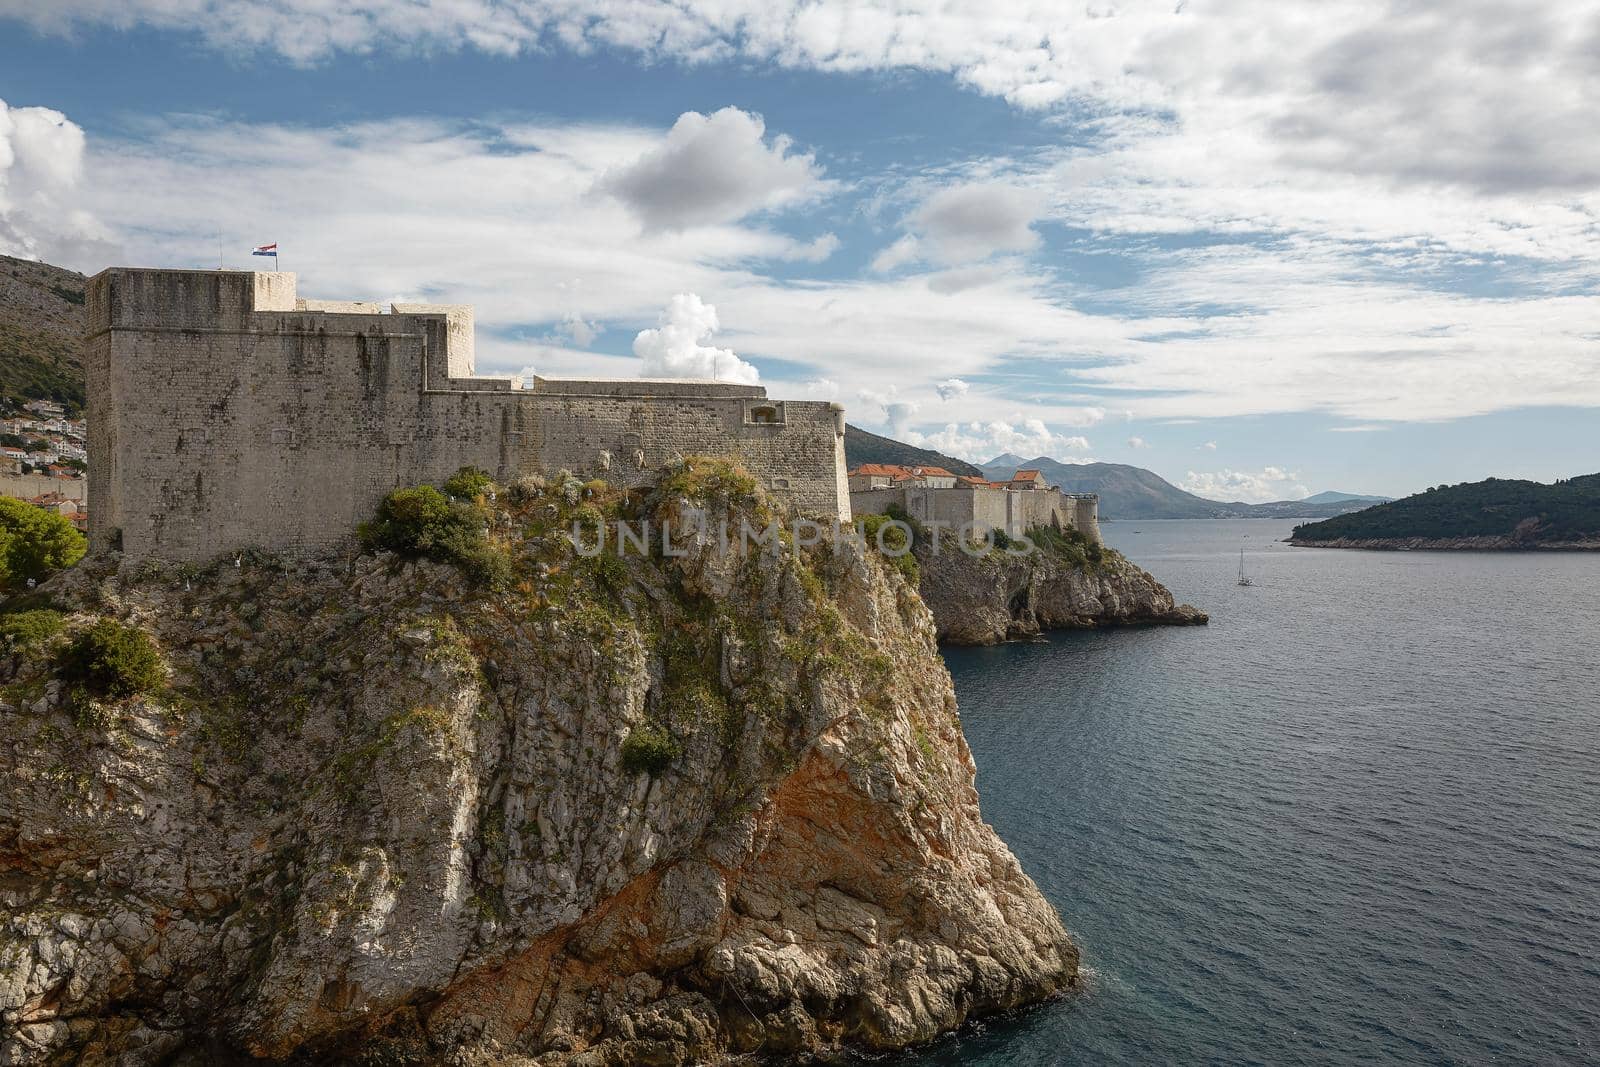 Ancient fortress on the cliff edge of Dubrovnik protects the port.